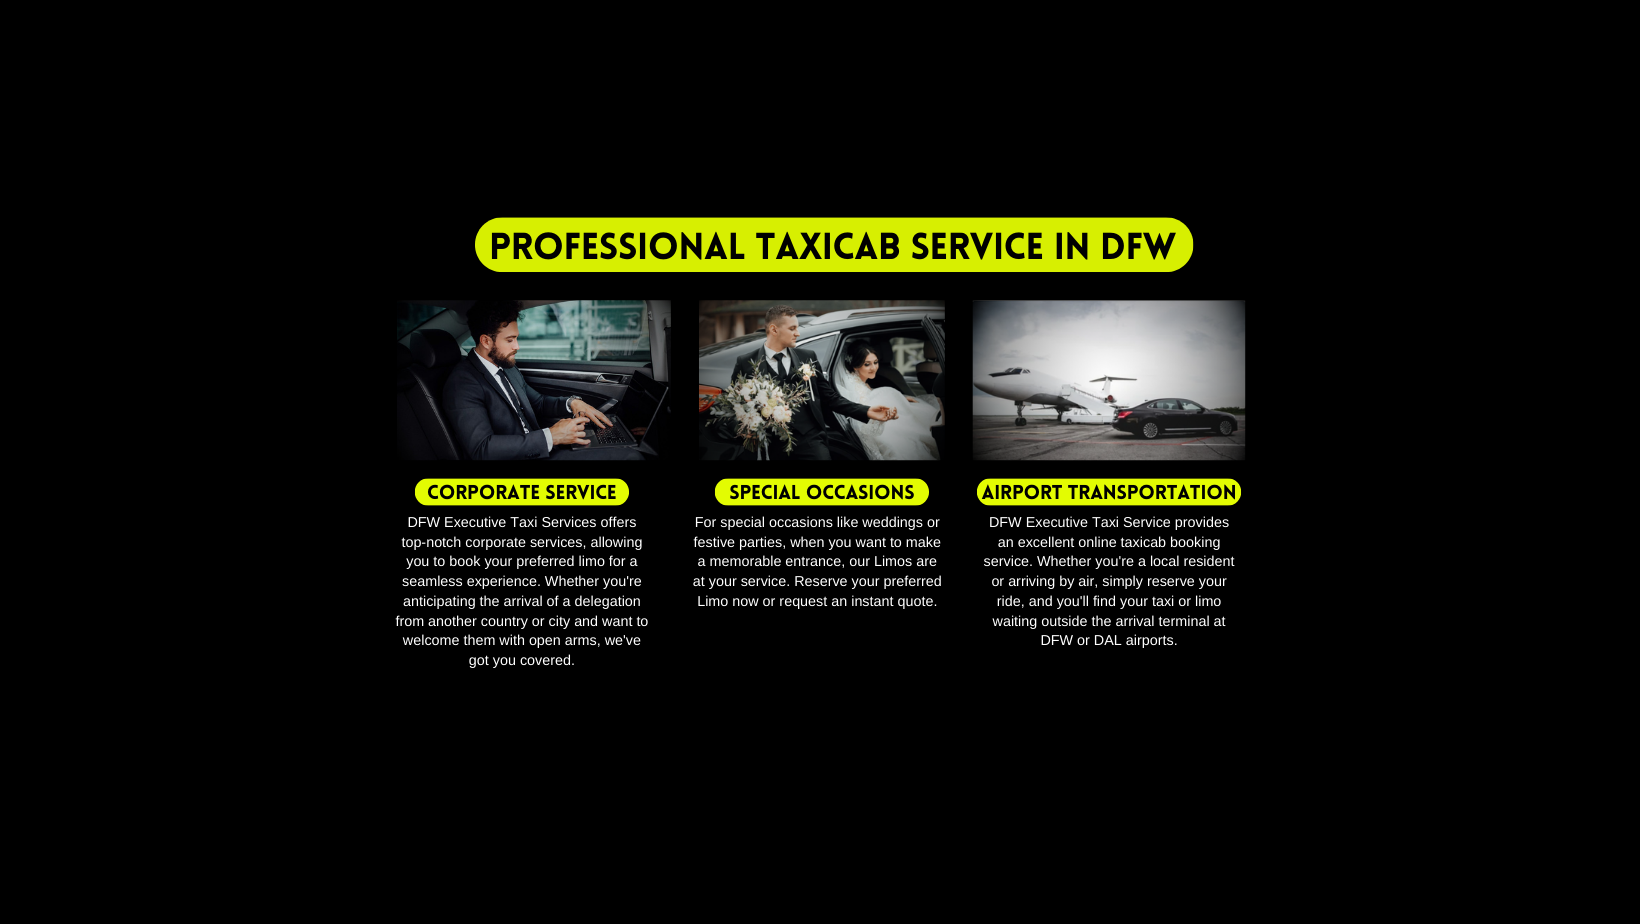 Professional Taxicab Service in DFW